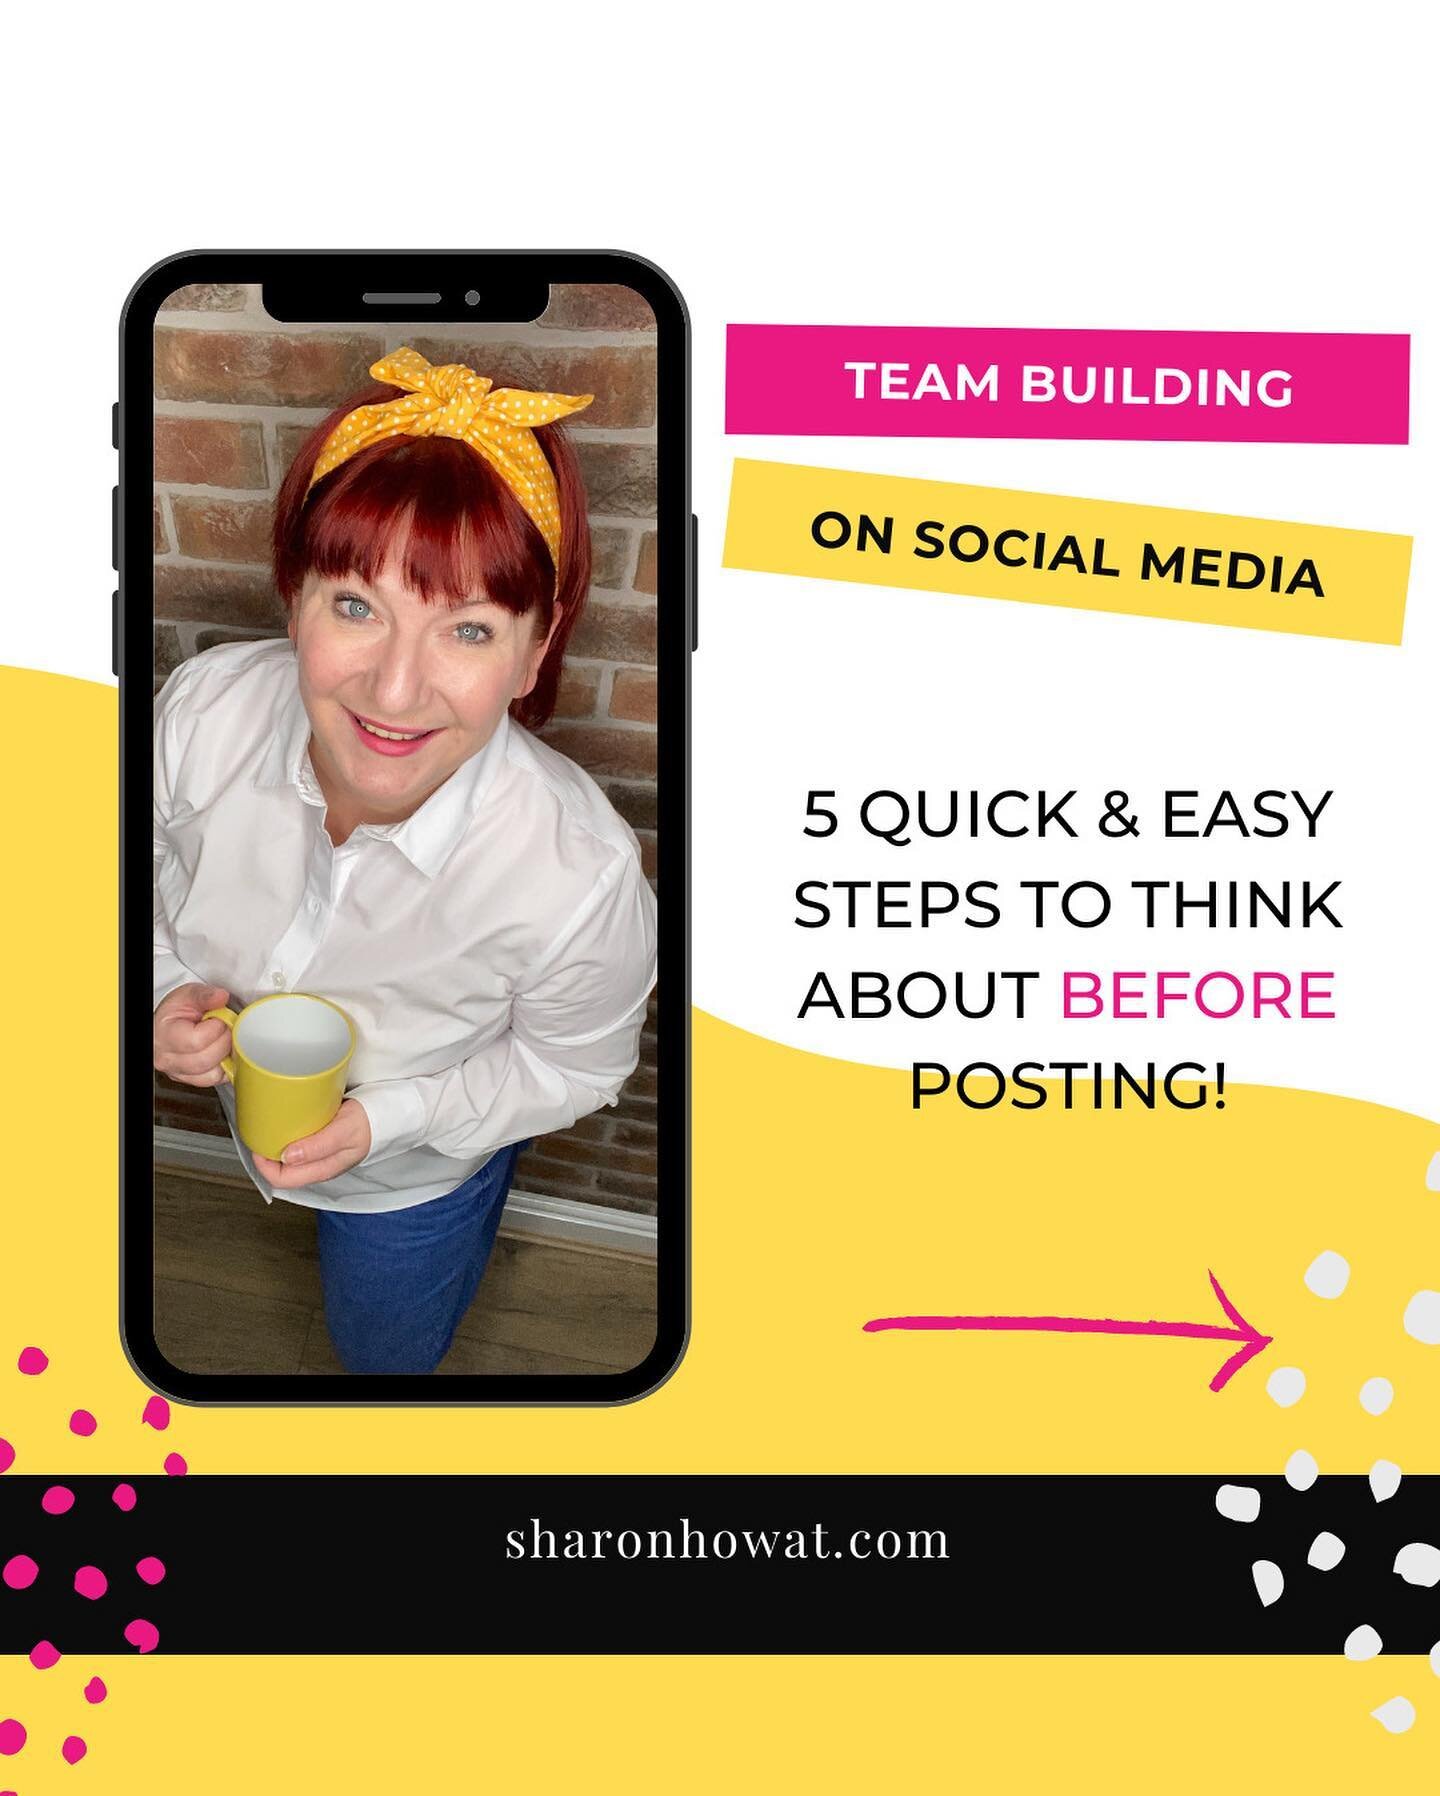 Do you need more team members?

Follow these steps before you post on social media 📱

Want more tips?
Follow me @sharon.howat and hit the link in my bio